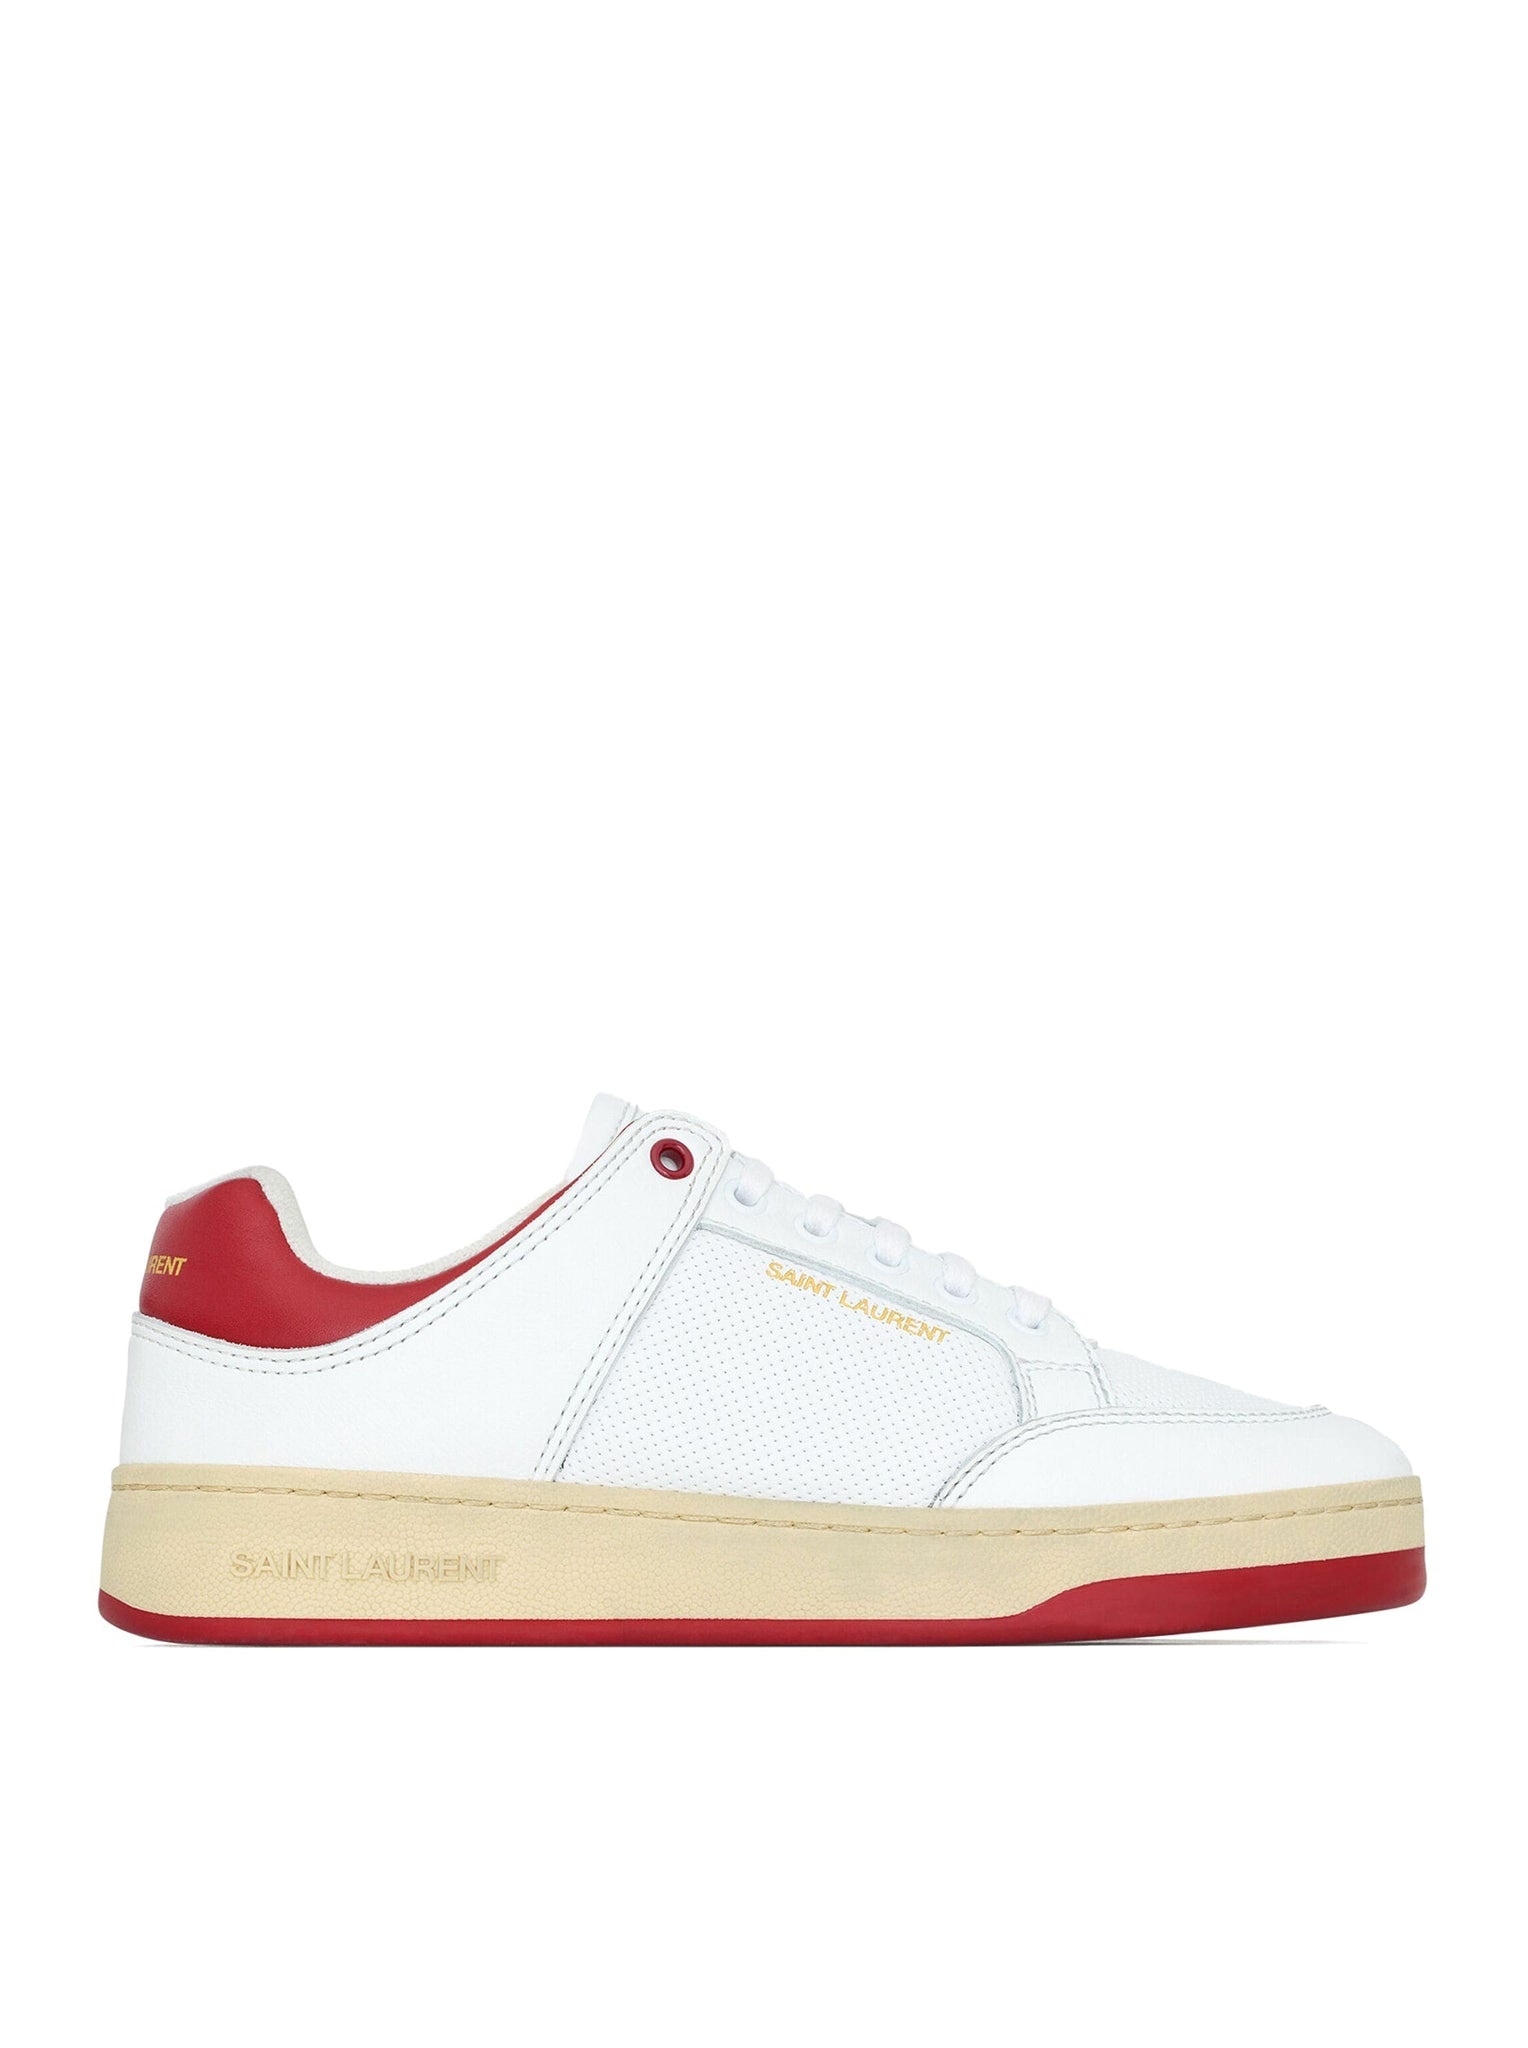 SL/61 LEATHER SNEAKERS - 1